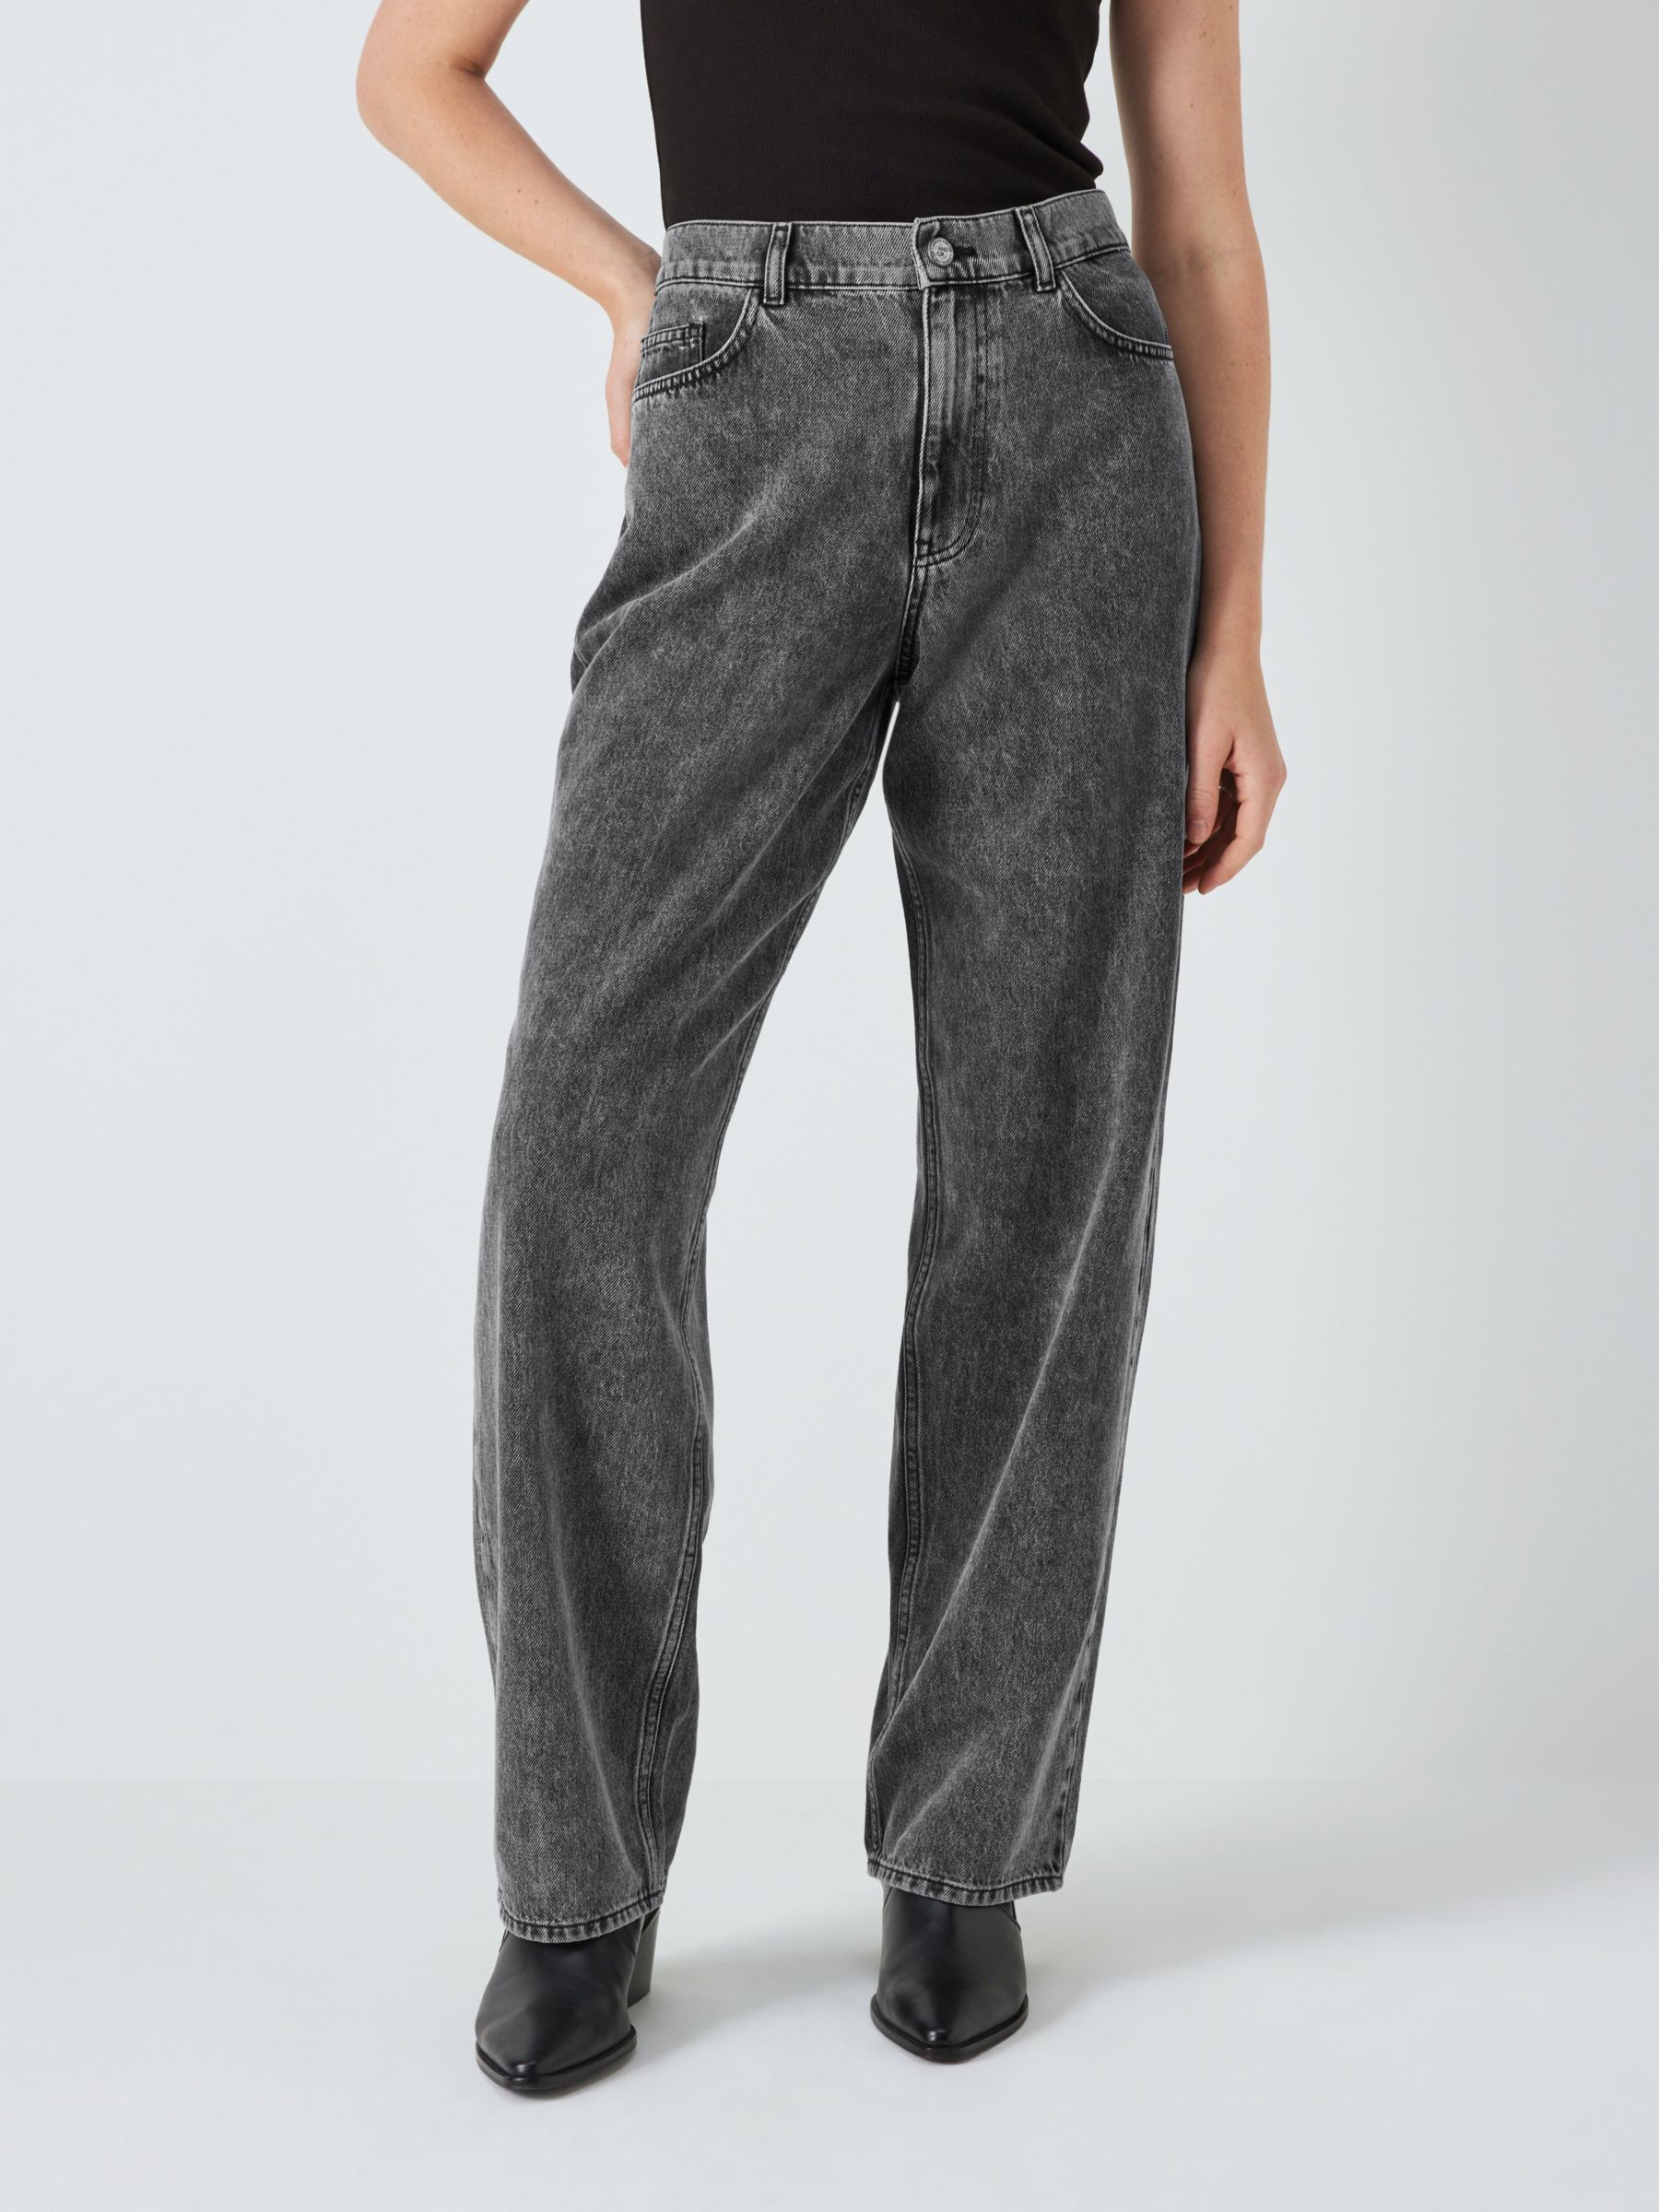 AND/OR Long Beach Baggy Jeans, Dark Grey at John Lewis & Partners